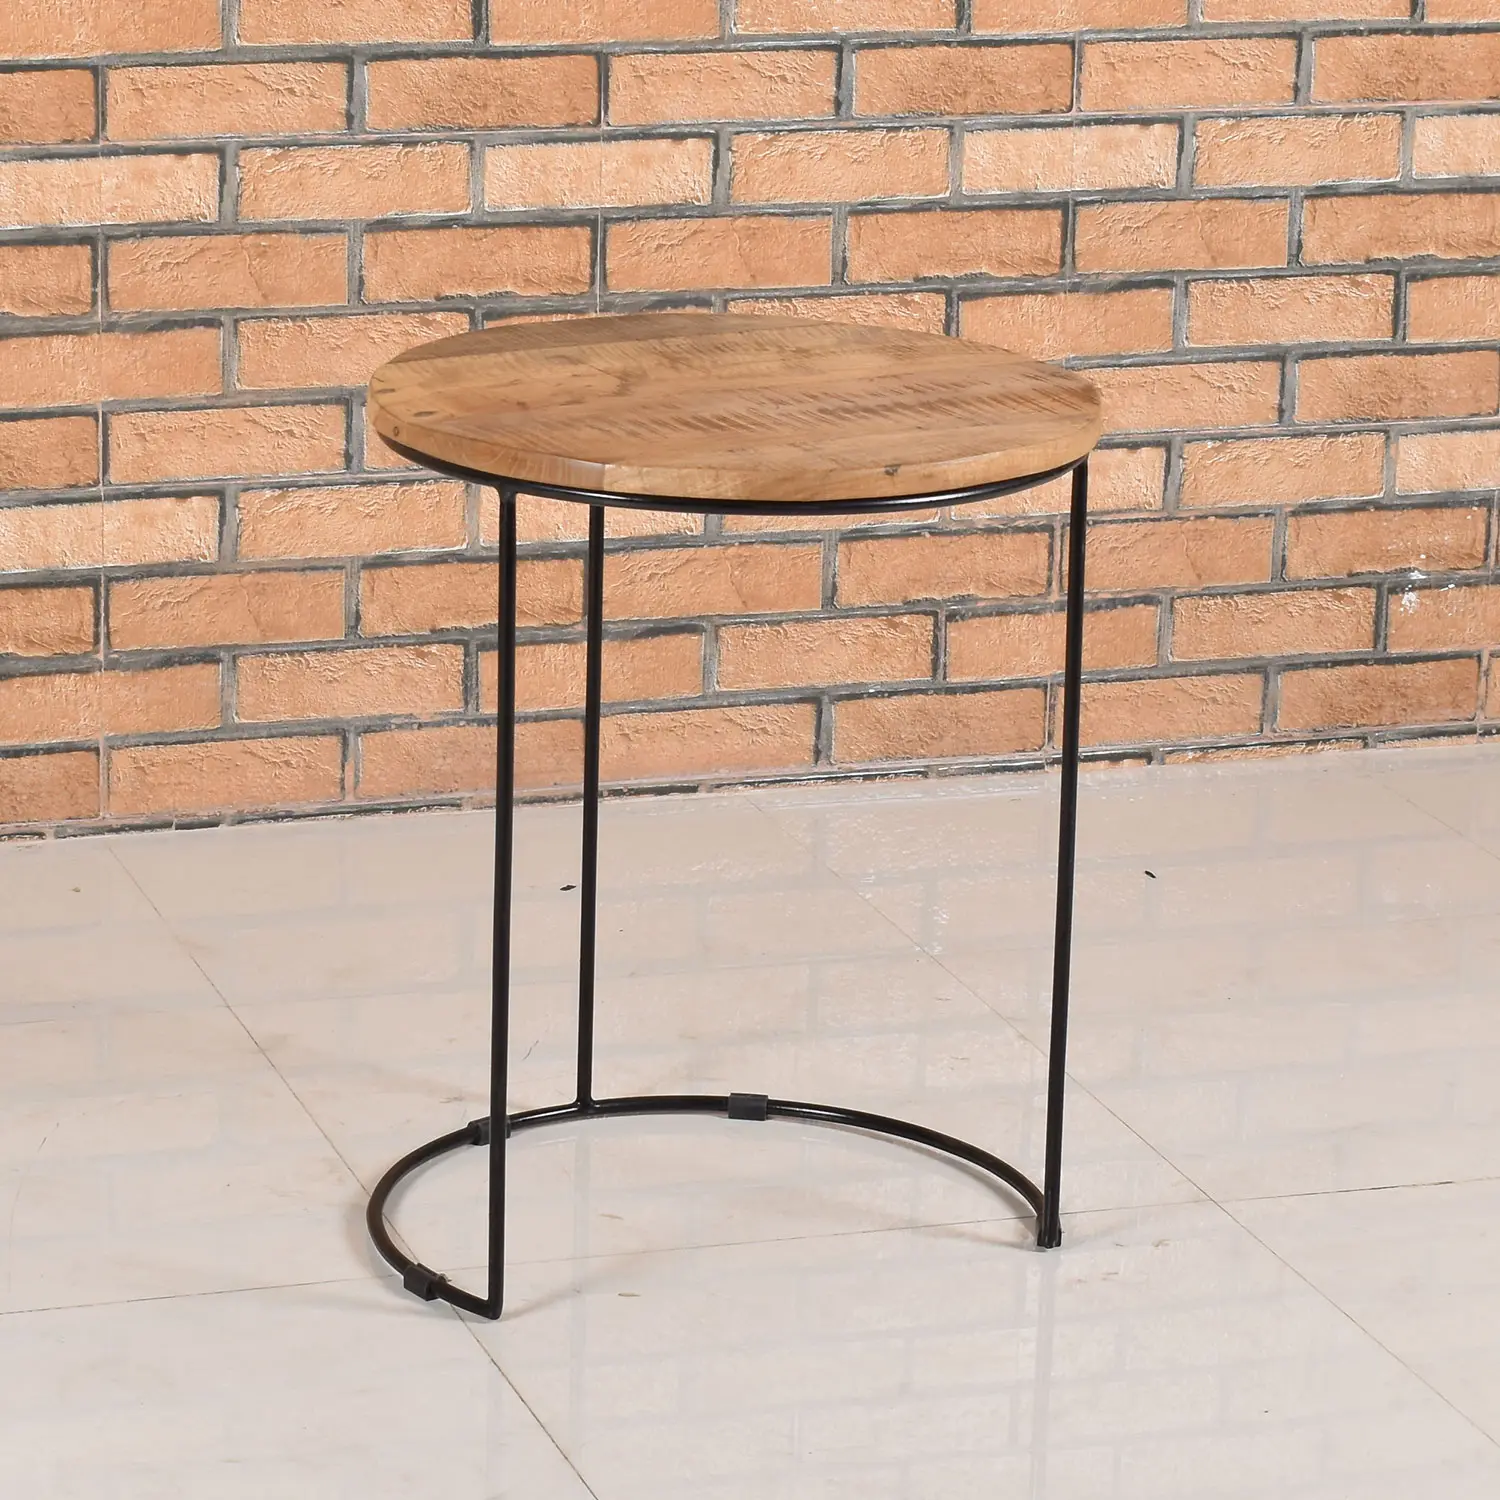 Iron Round  Side Table with Wooden Top - popular handicrafts